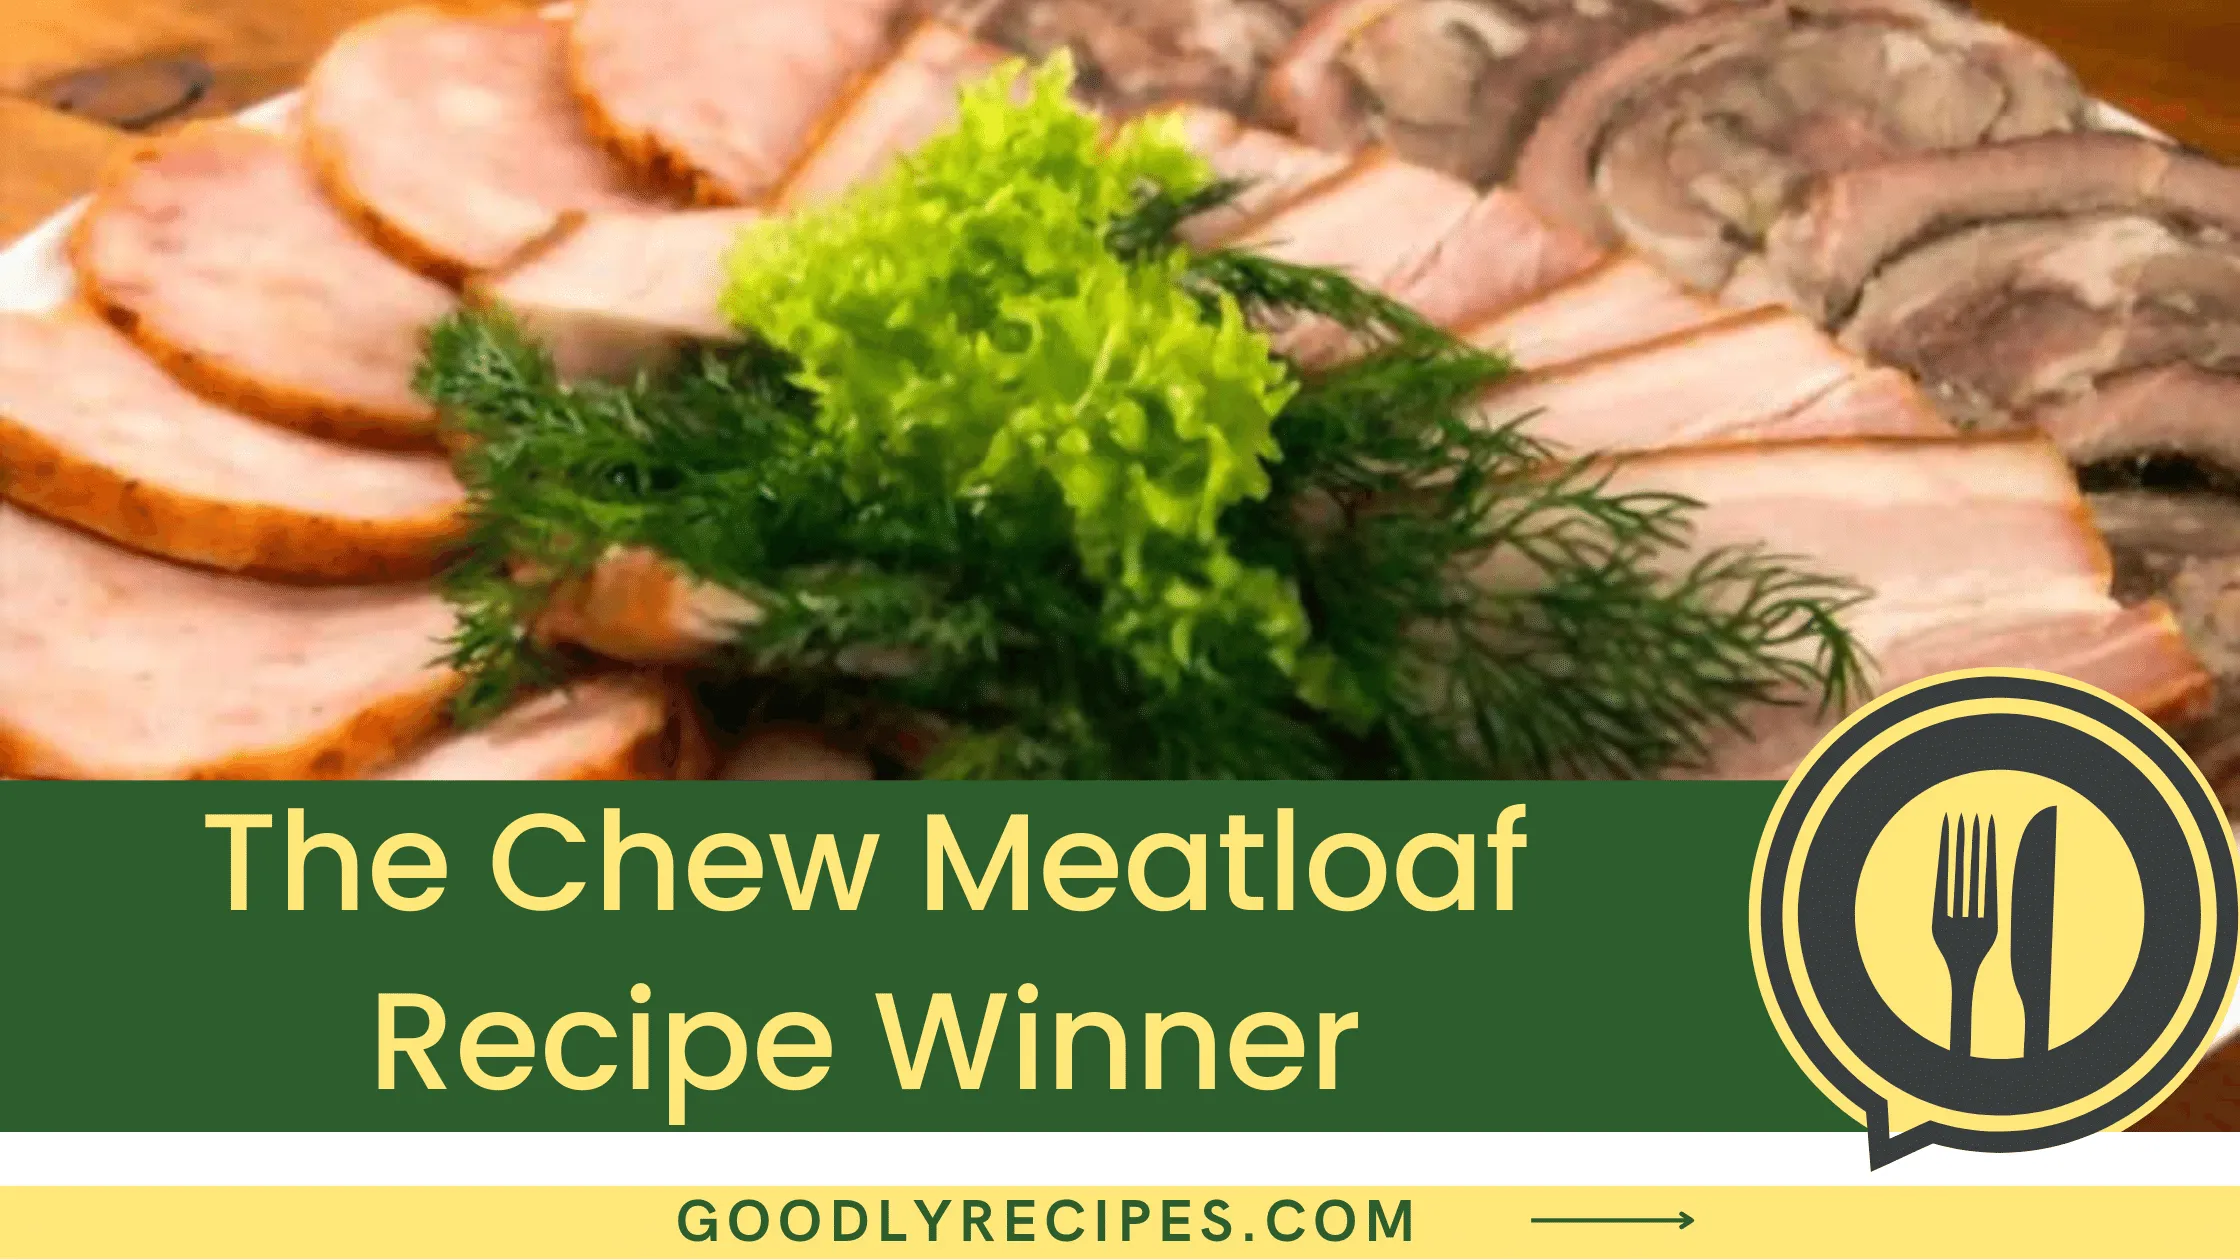 The Chew Meatloaf Recipe Winner - For Food Lovers